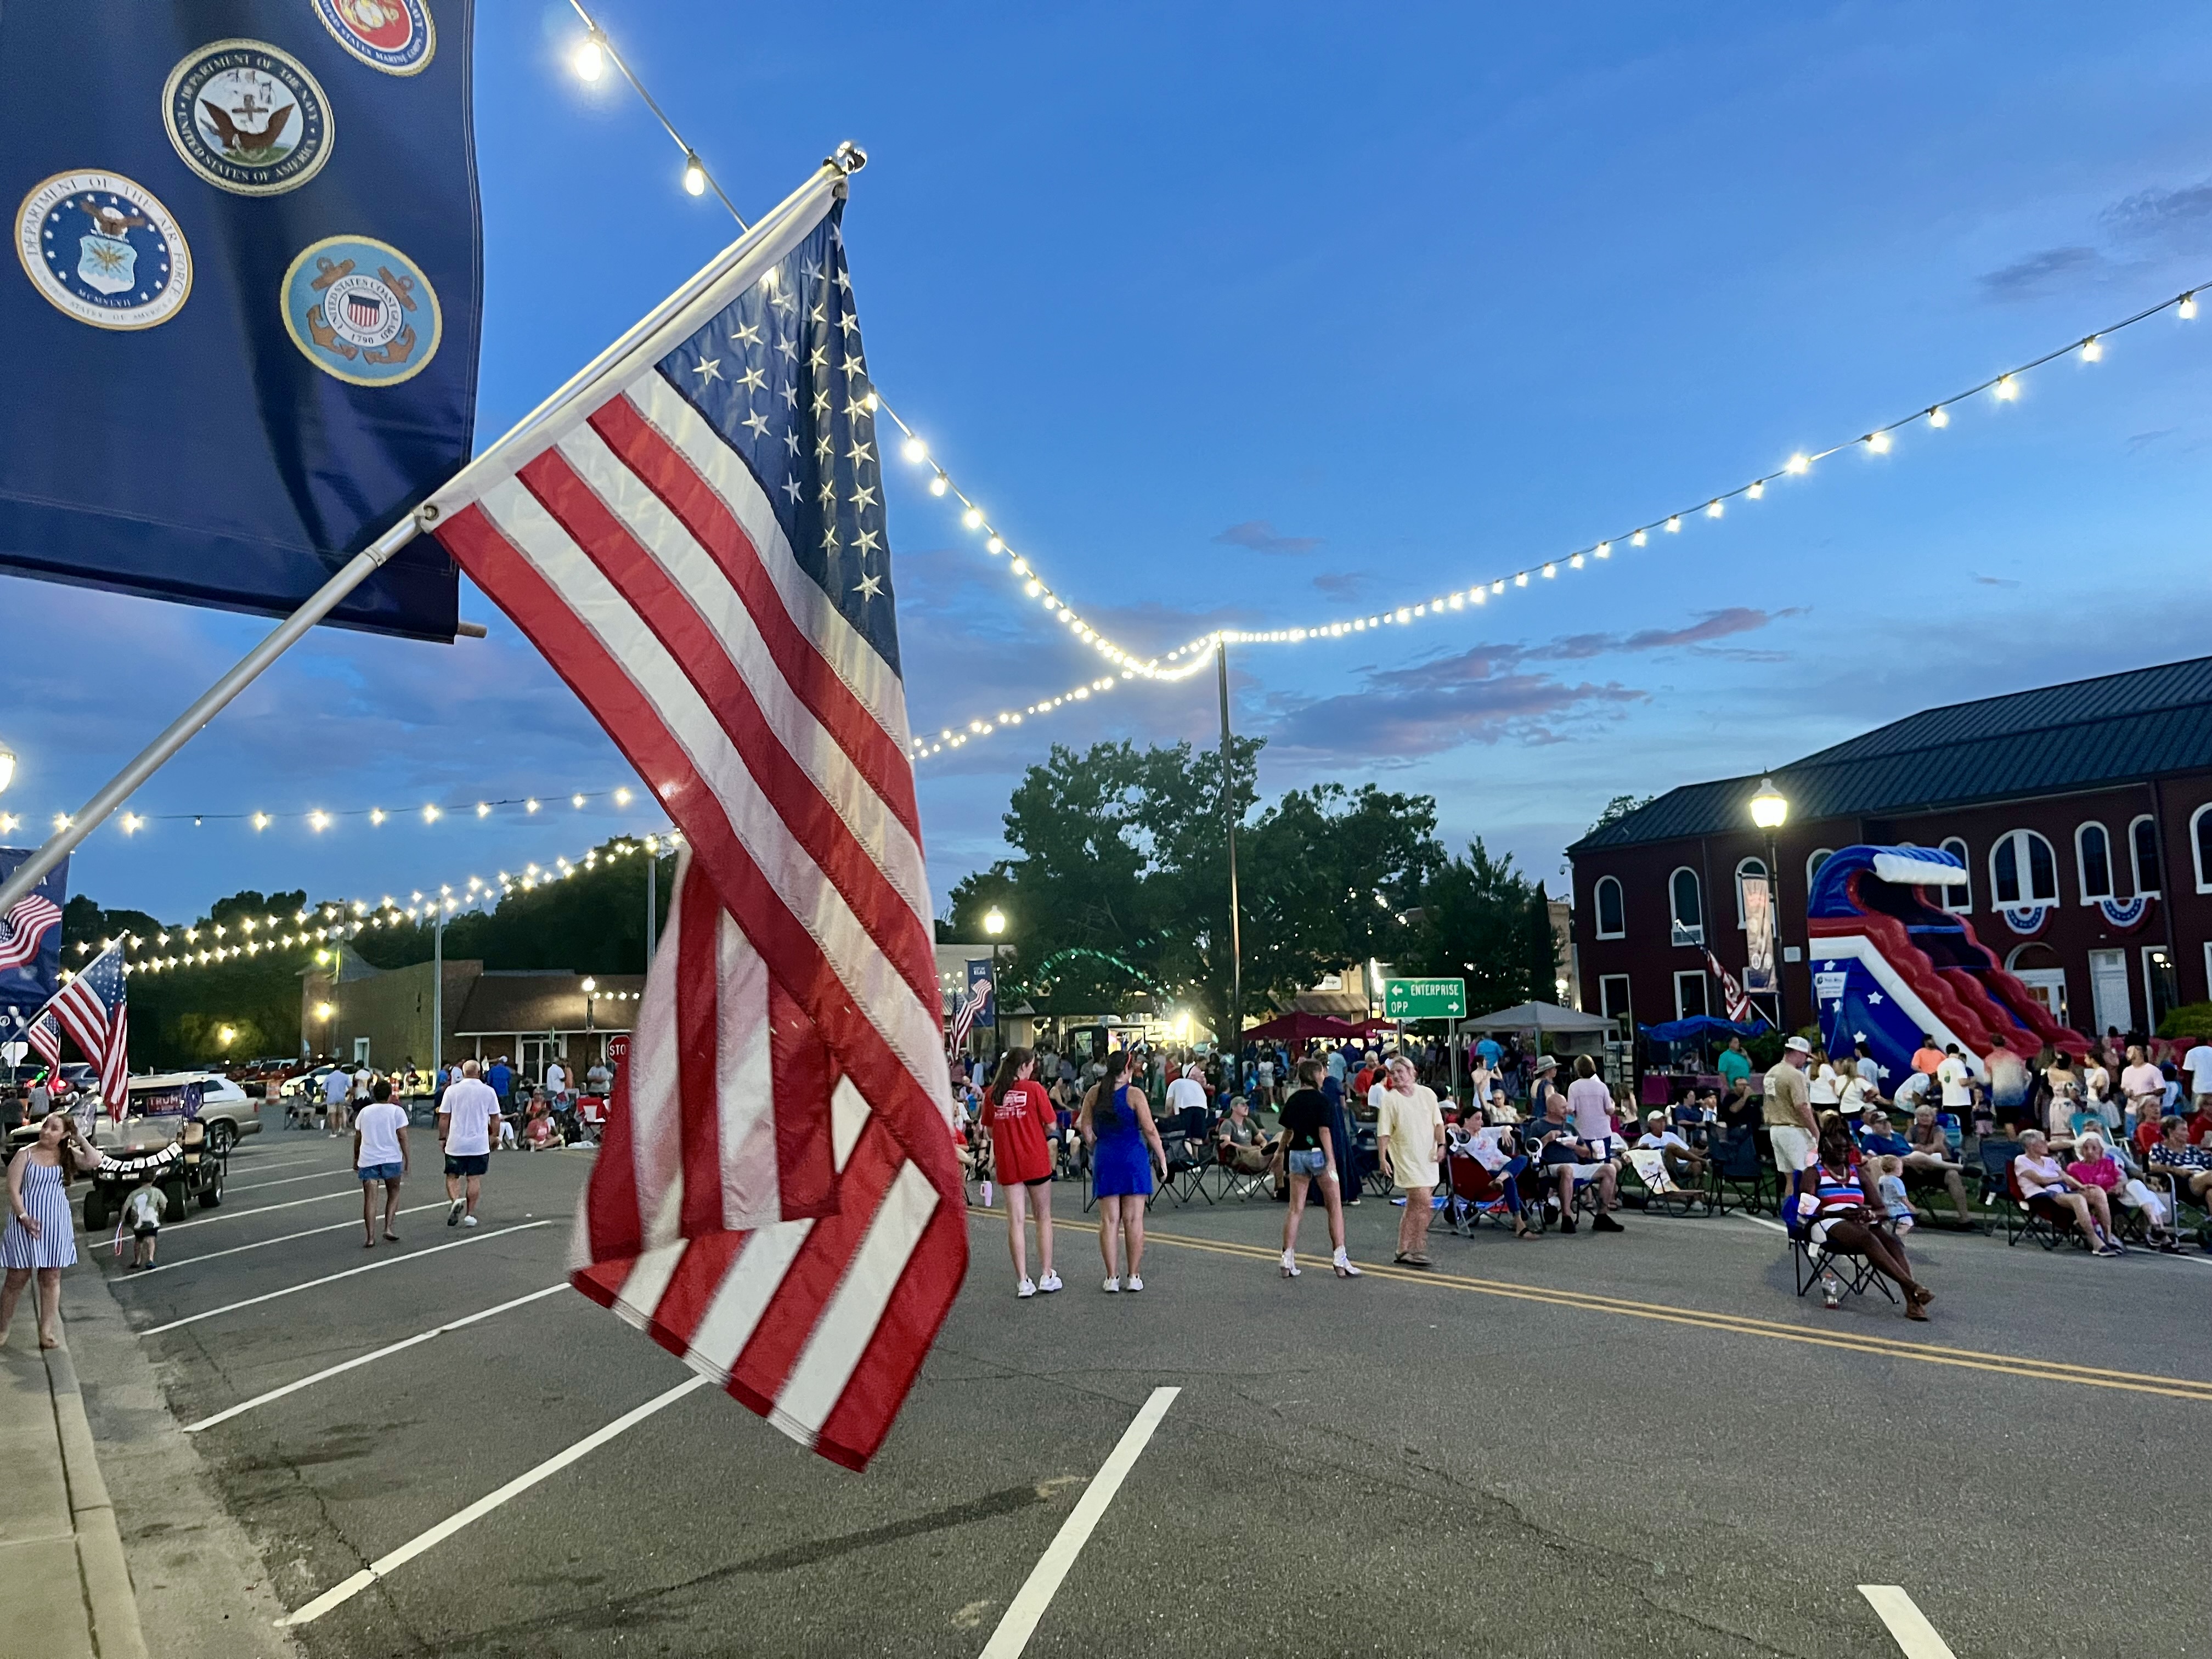 Flags, fireworks and food bring in the crowds for Elba’s “party with a purpose.”